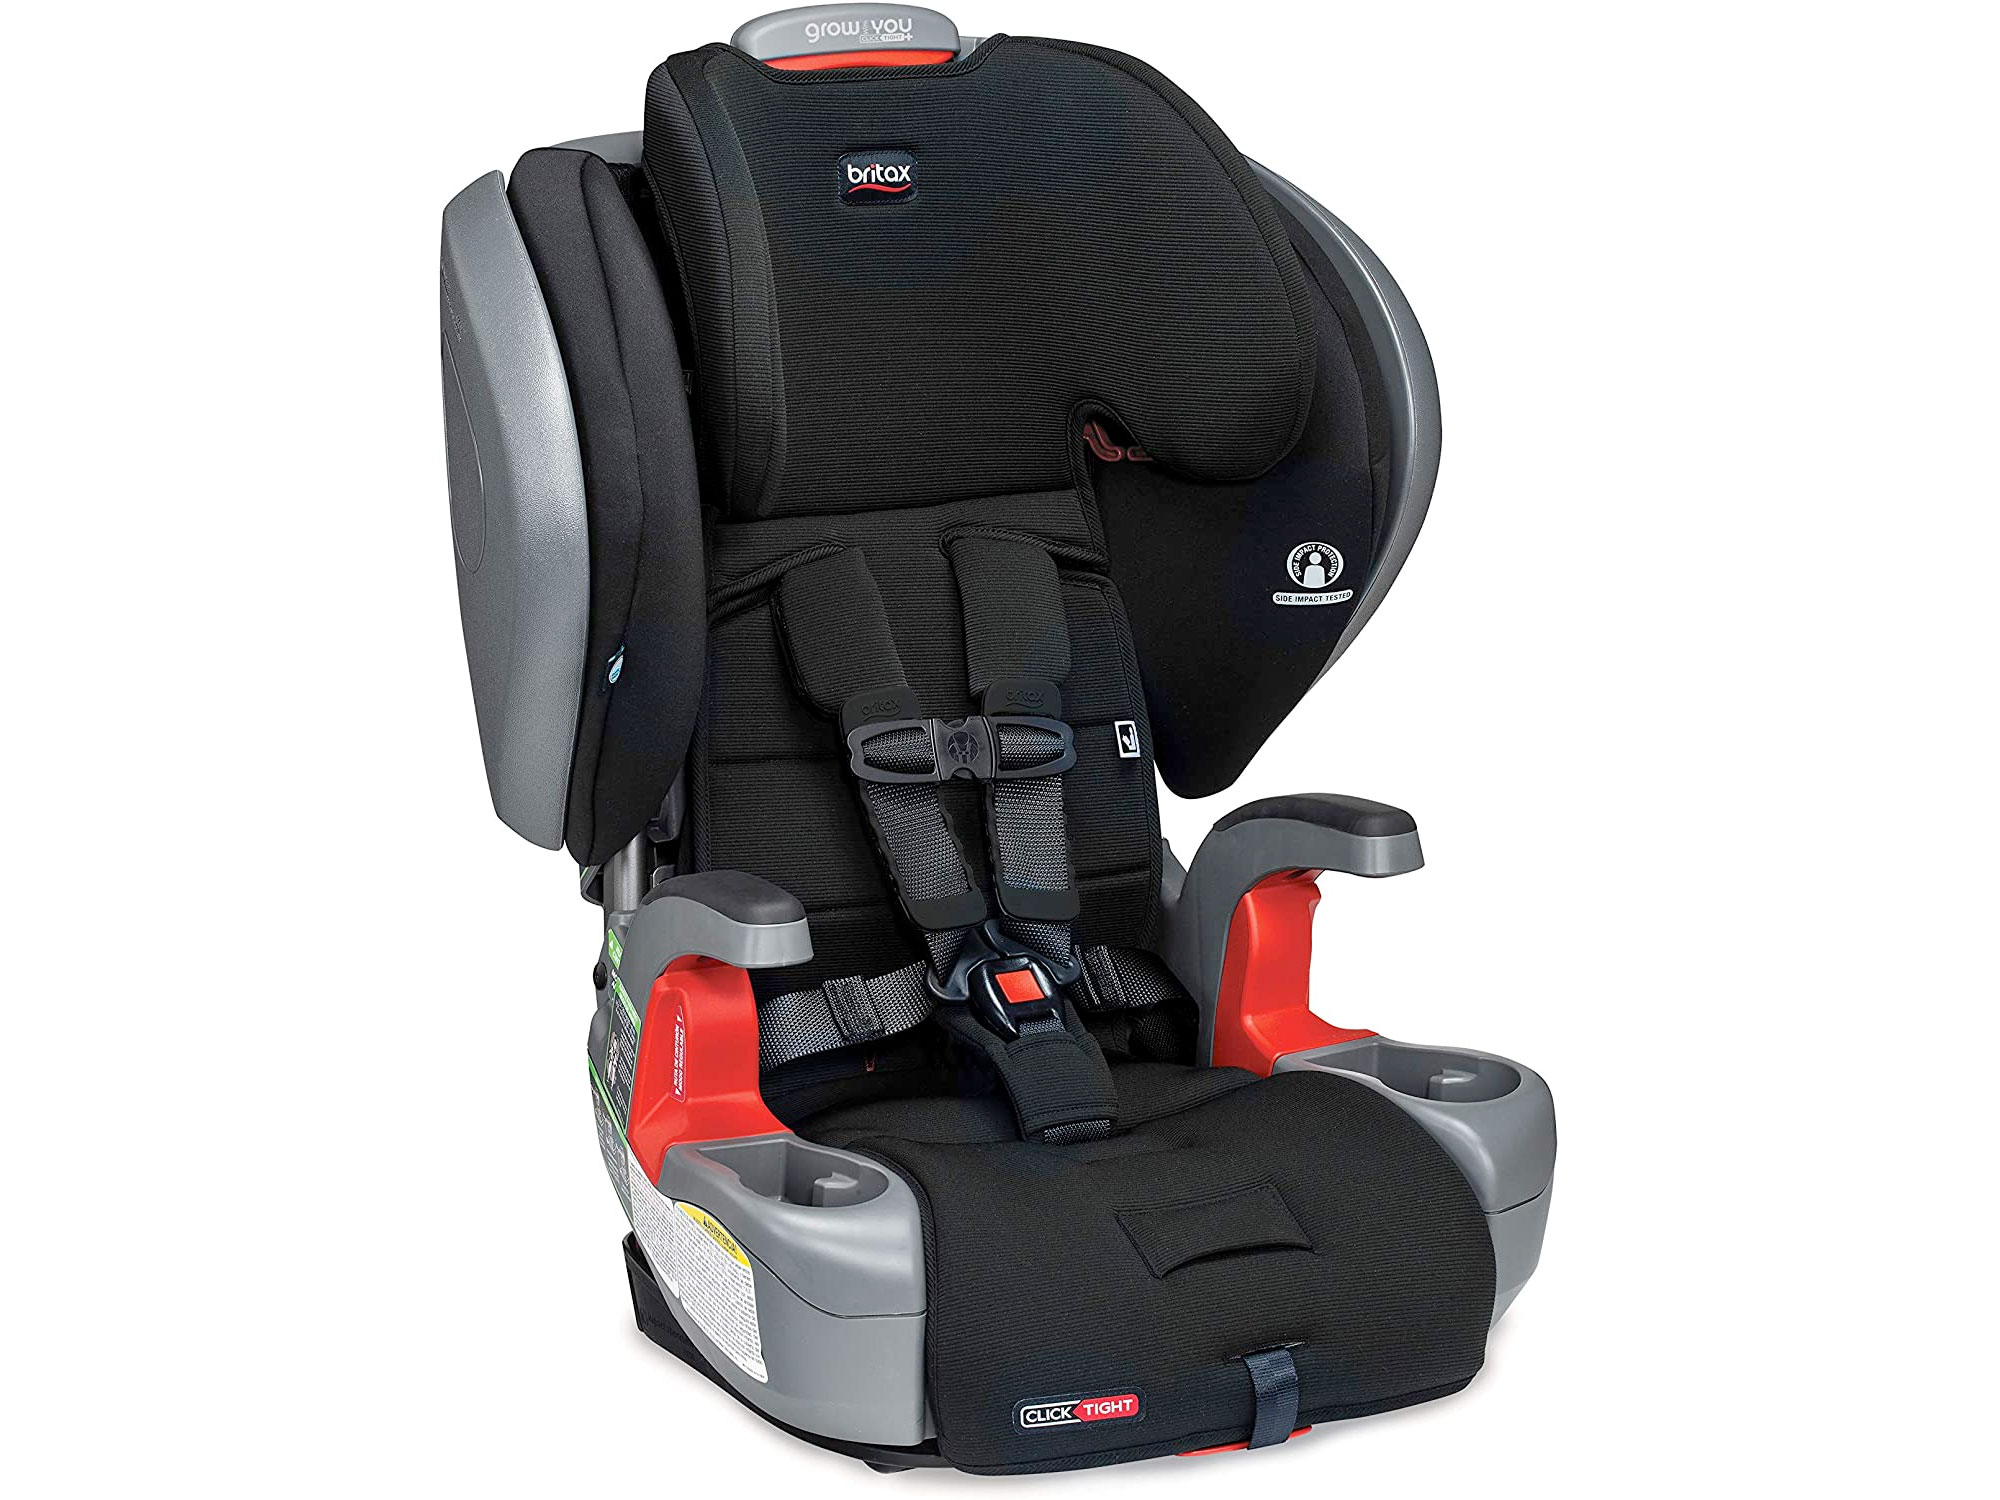 Amazon：BRITAX Grow with You ClickTight Plus Harness-2-Booster Car Seat只賣$441.99